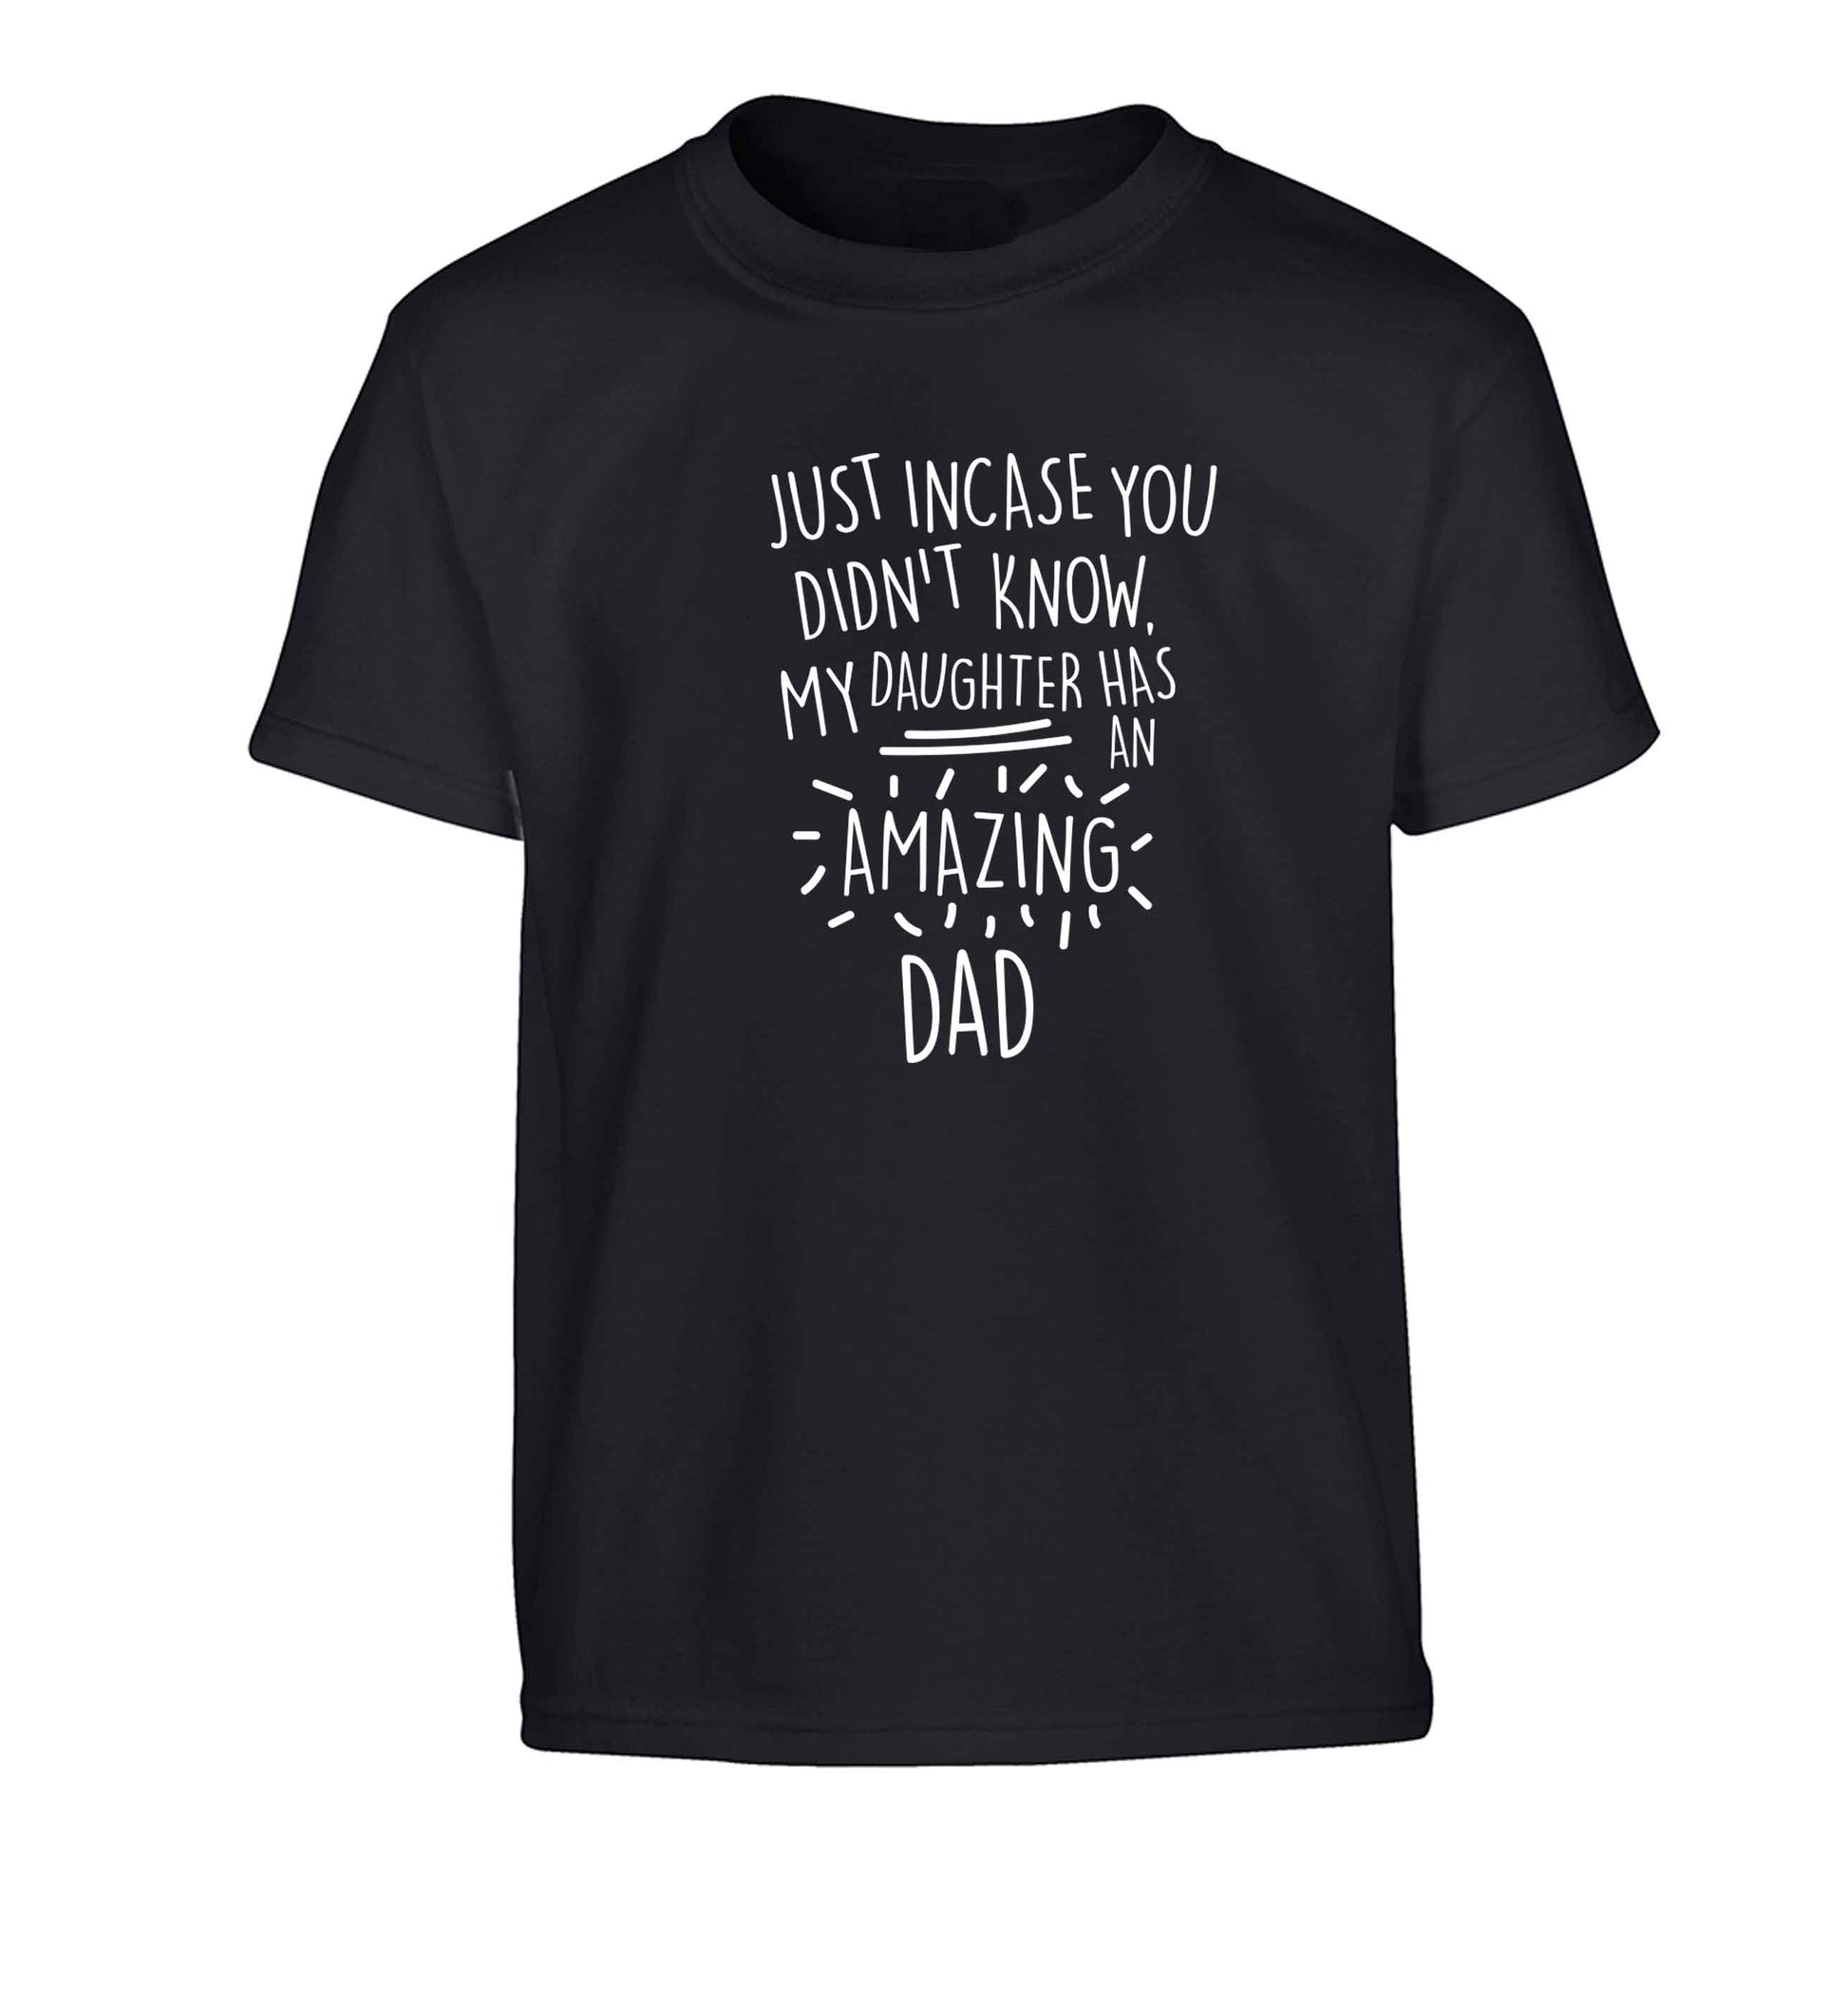 Just incase you didn't know my daughter has an amazing dad Children's black Tshirt 12-13 Years